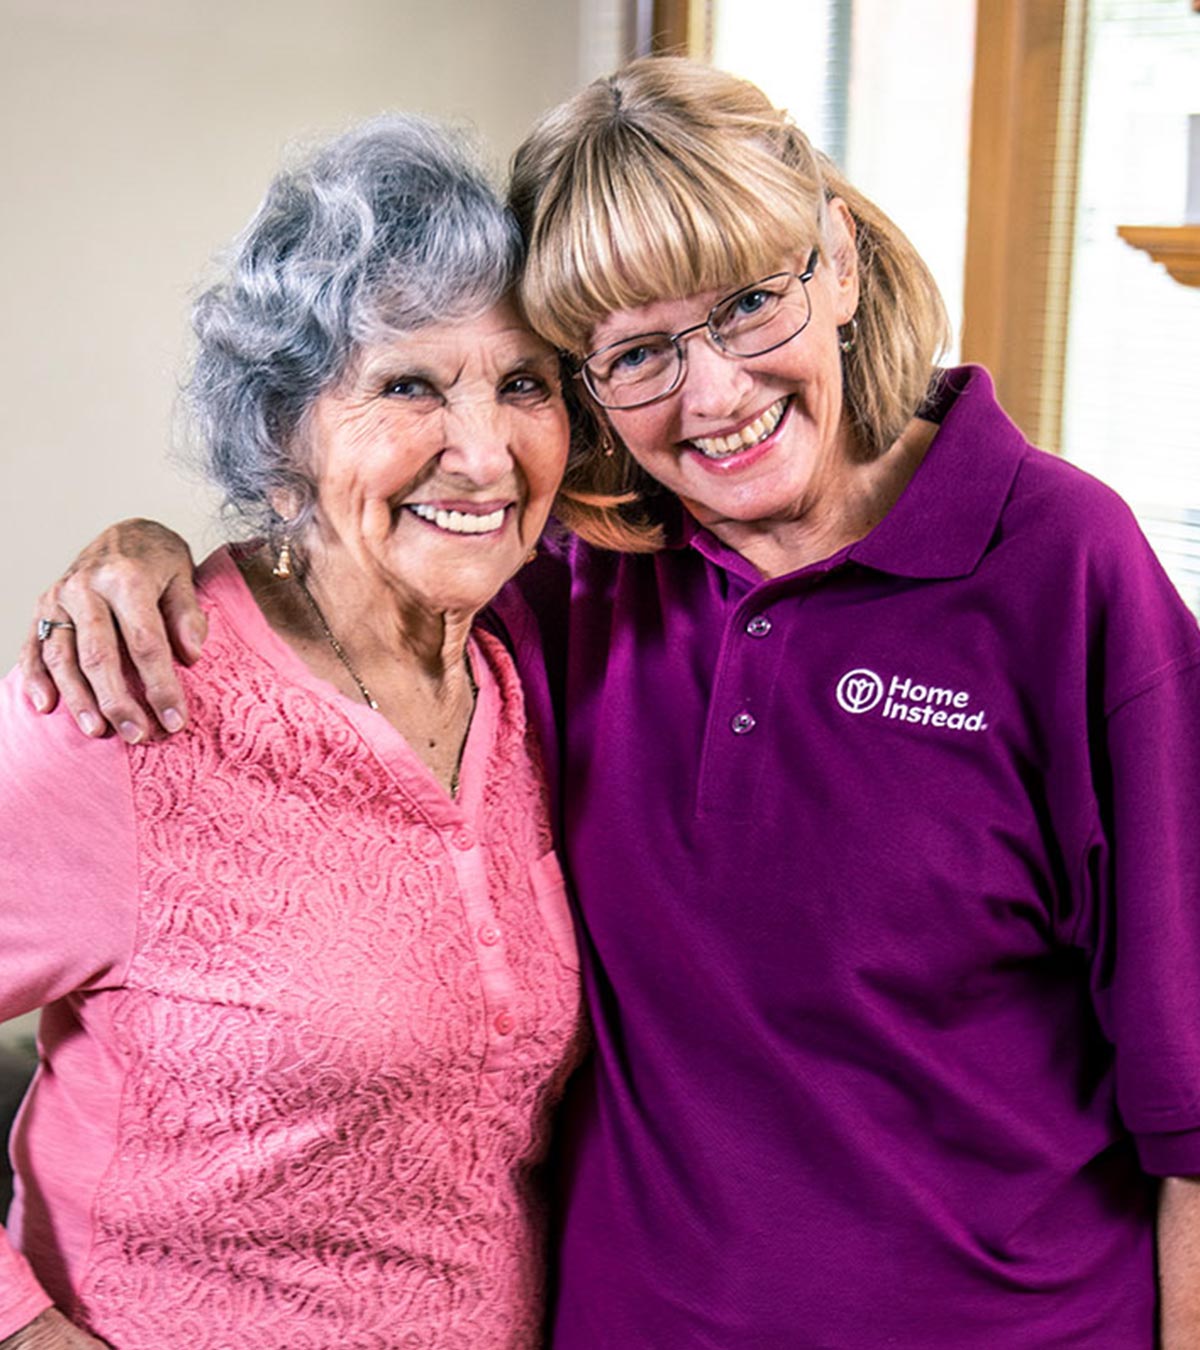 home instead caregiver and senior woman standing and smiling together at home jpg